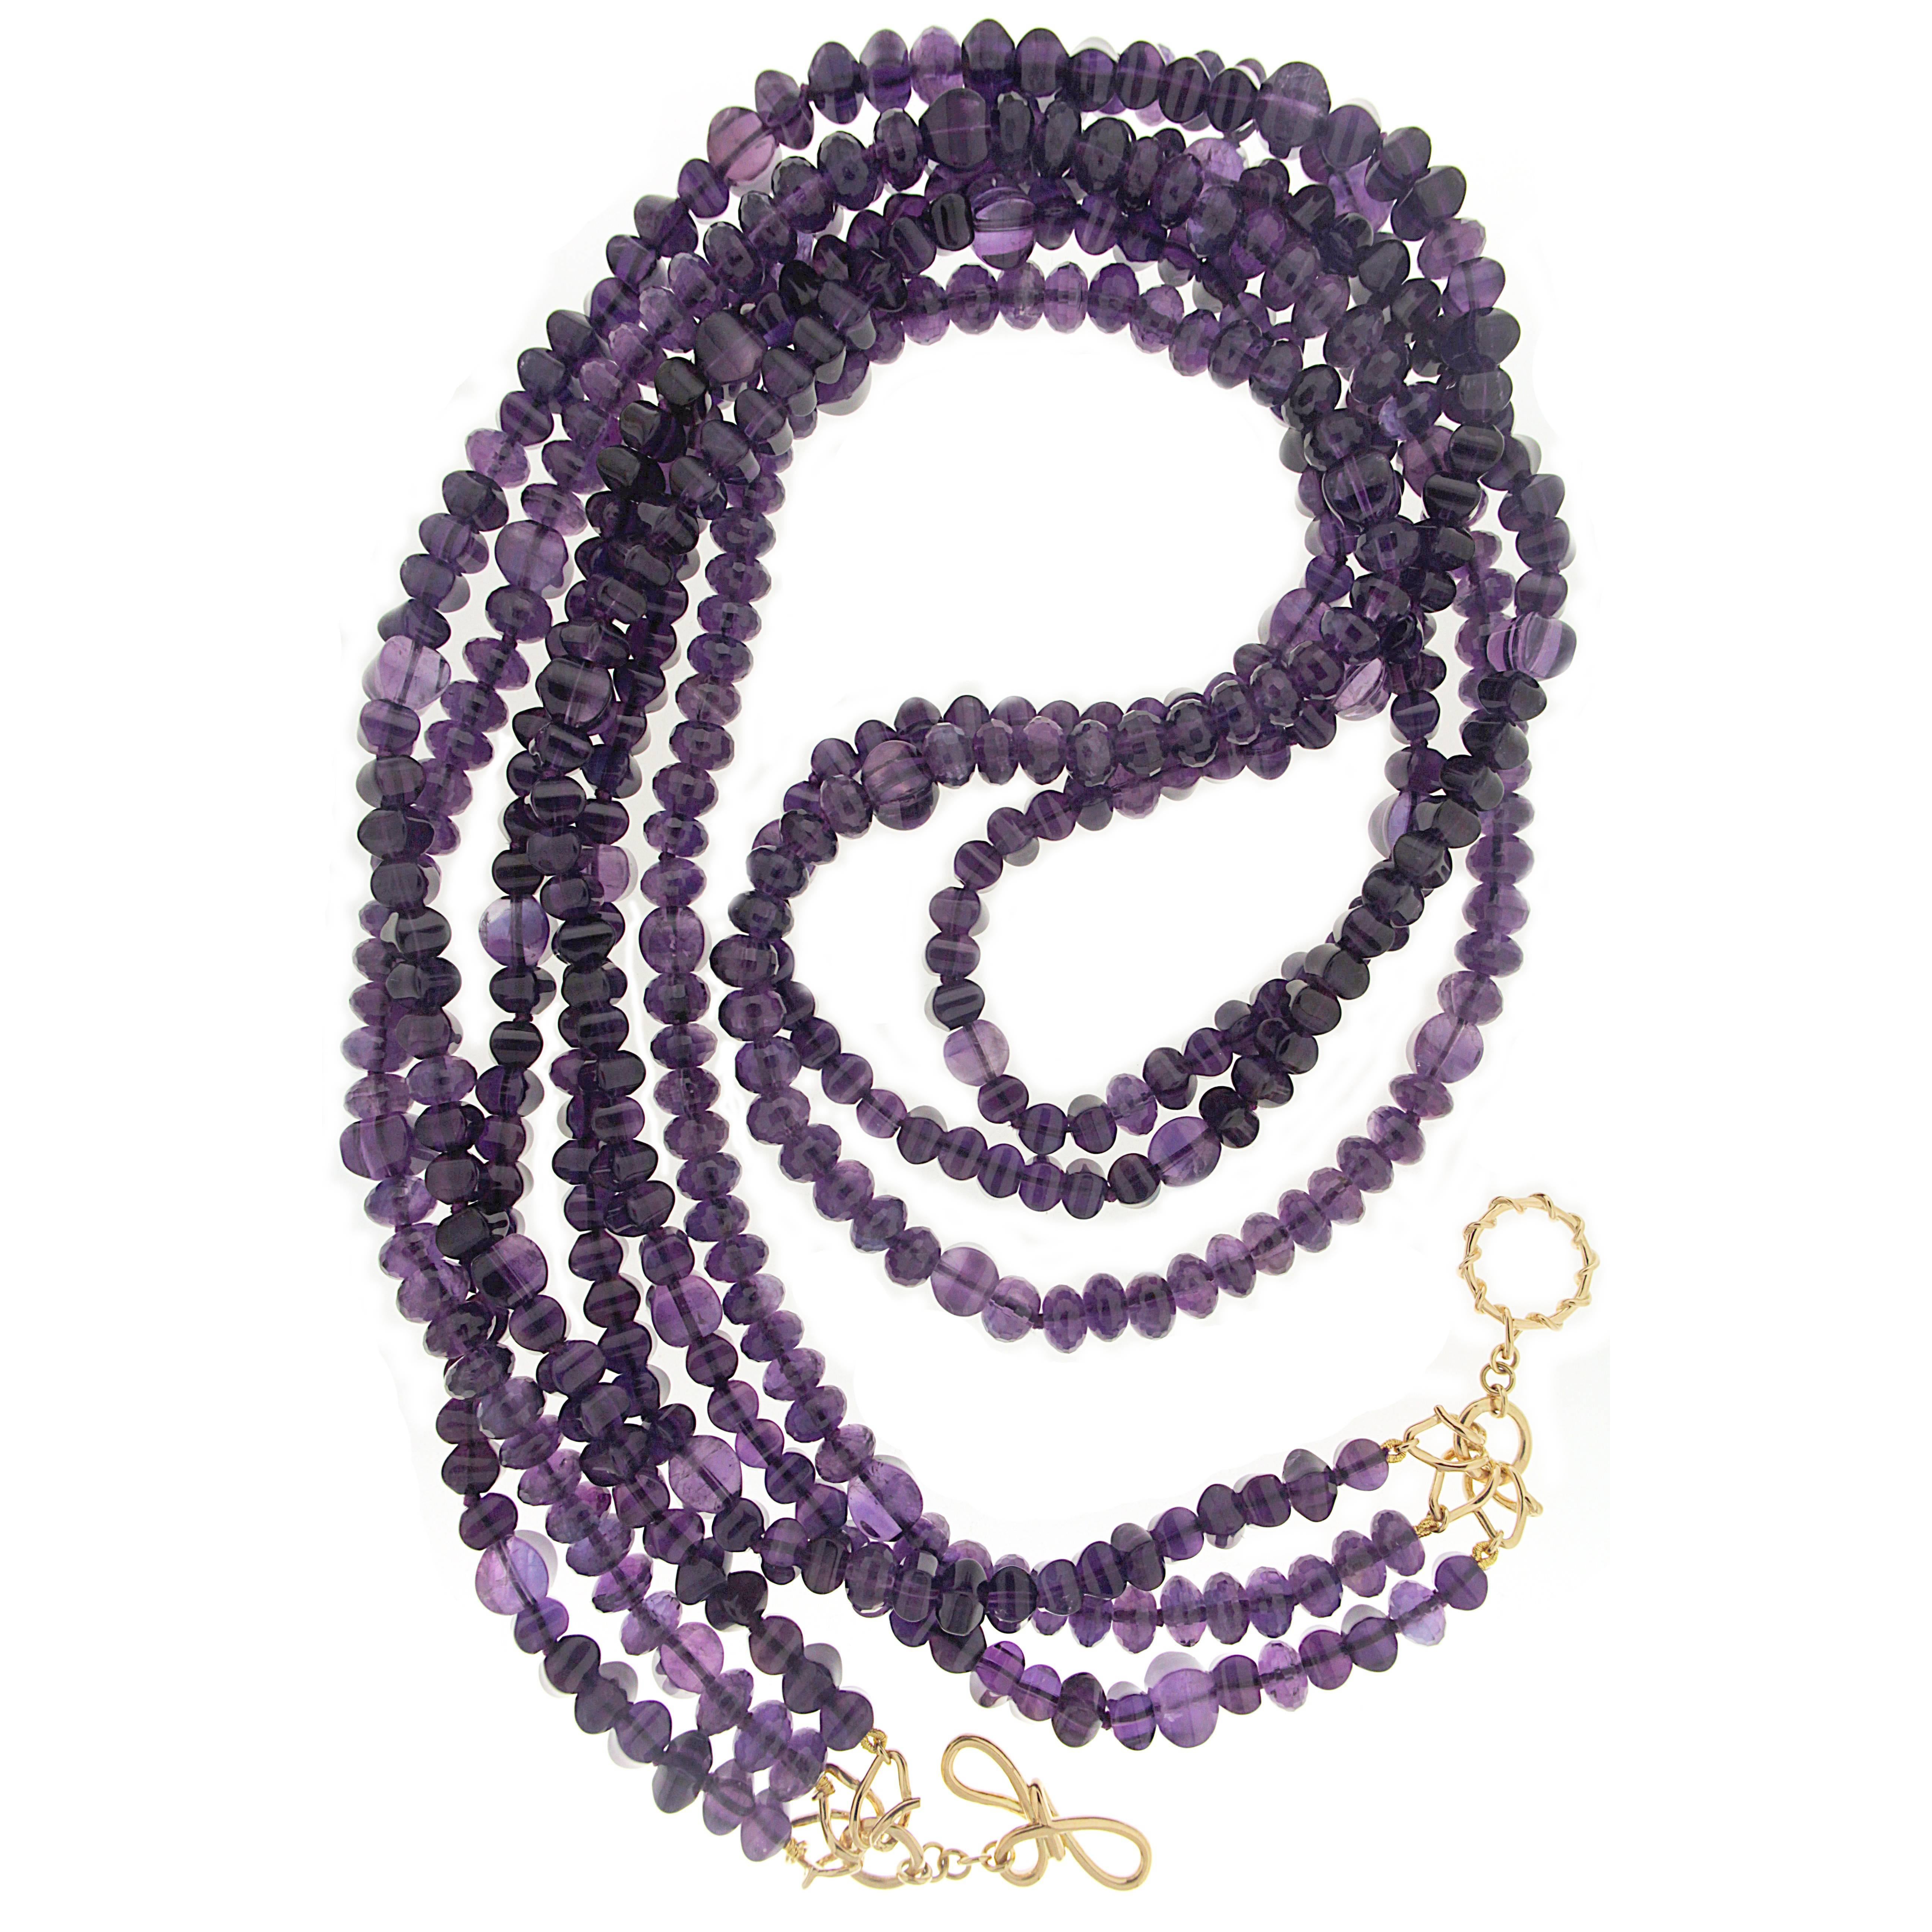 This necklace features three strands of Amethyst Cube Sugar Loaf & Roundel with 18kt yellow gold wire knot and wire link toggle.